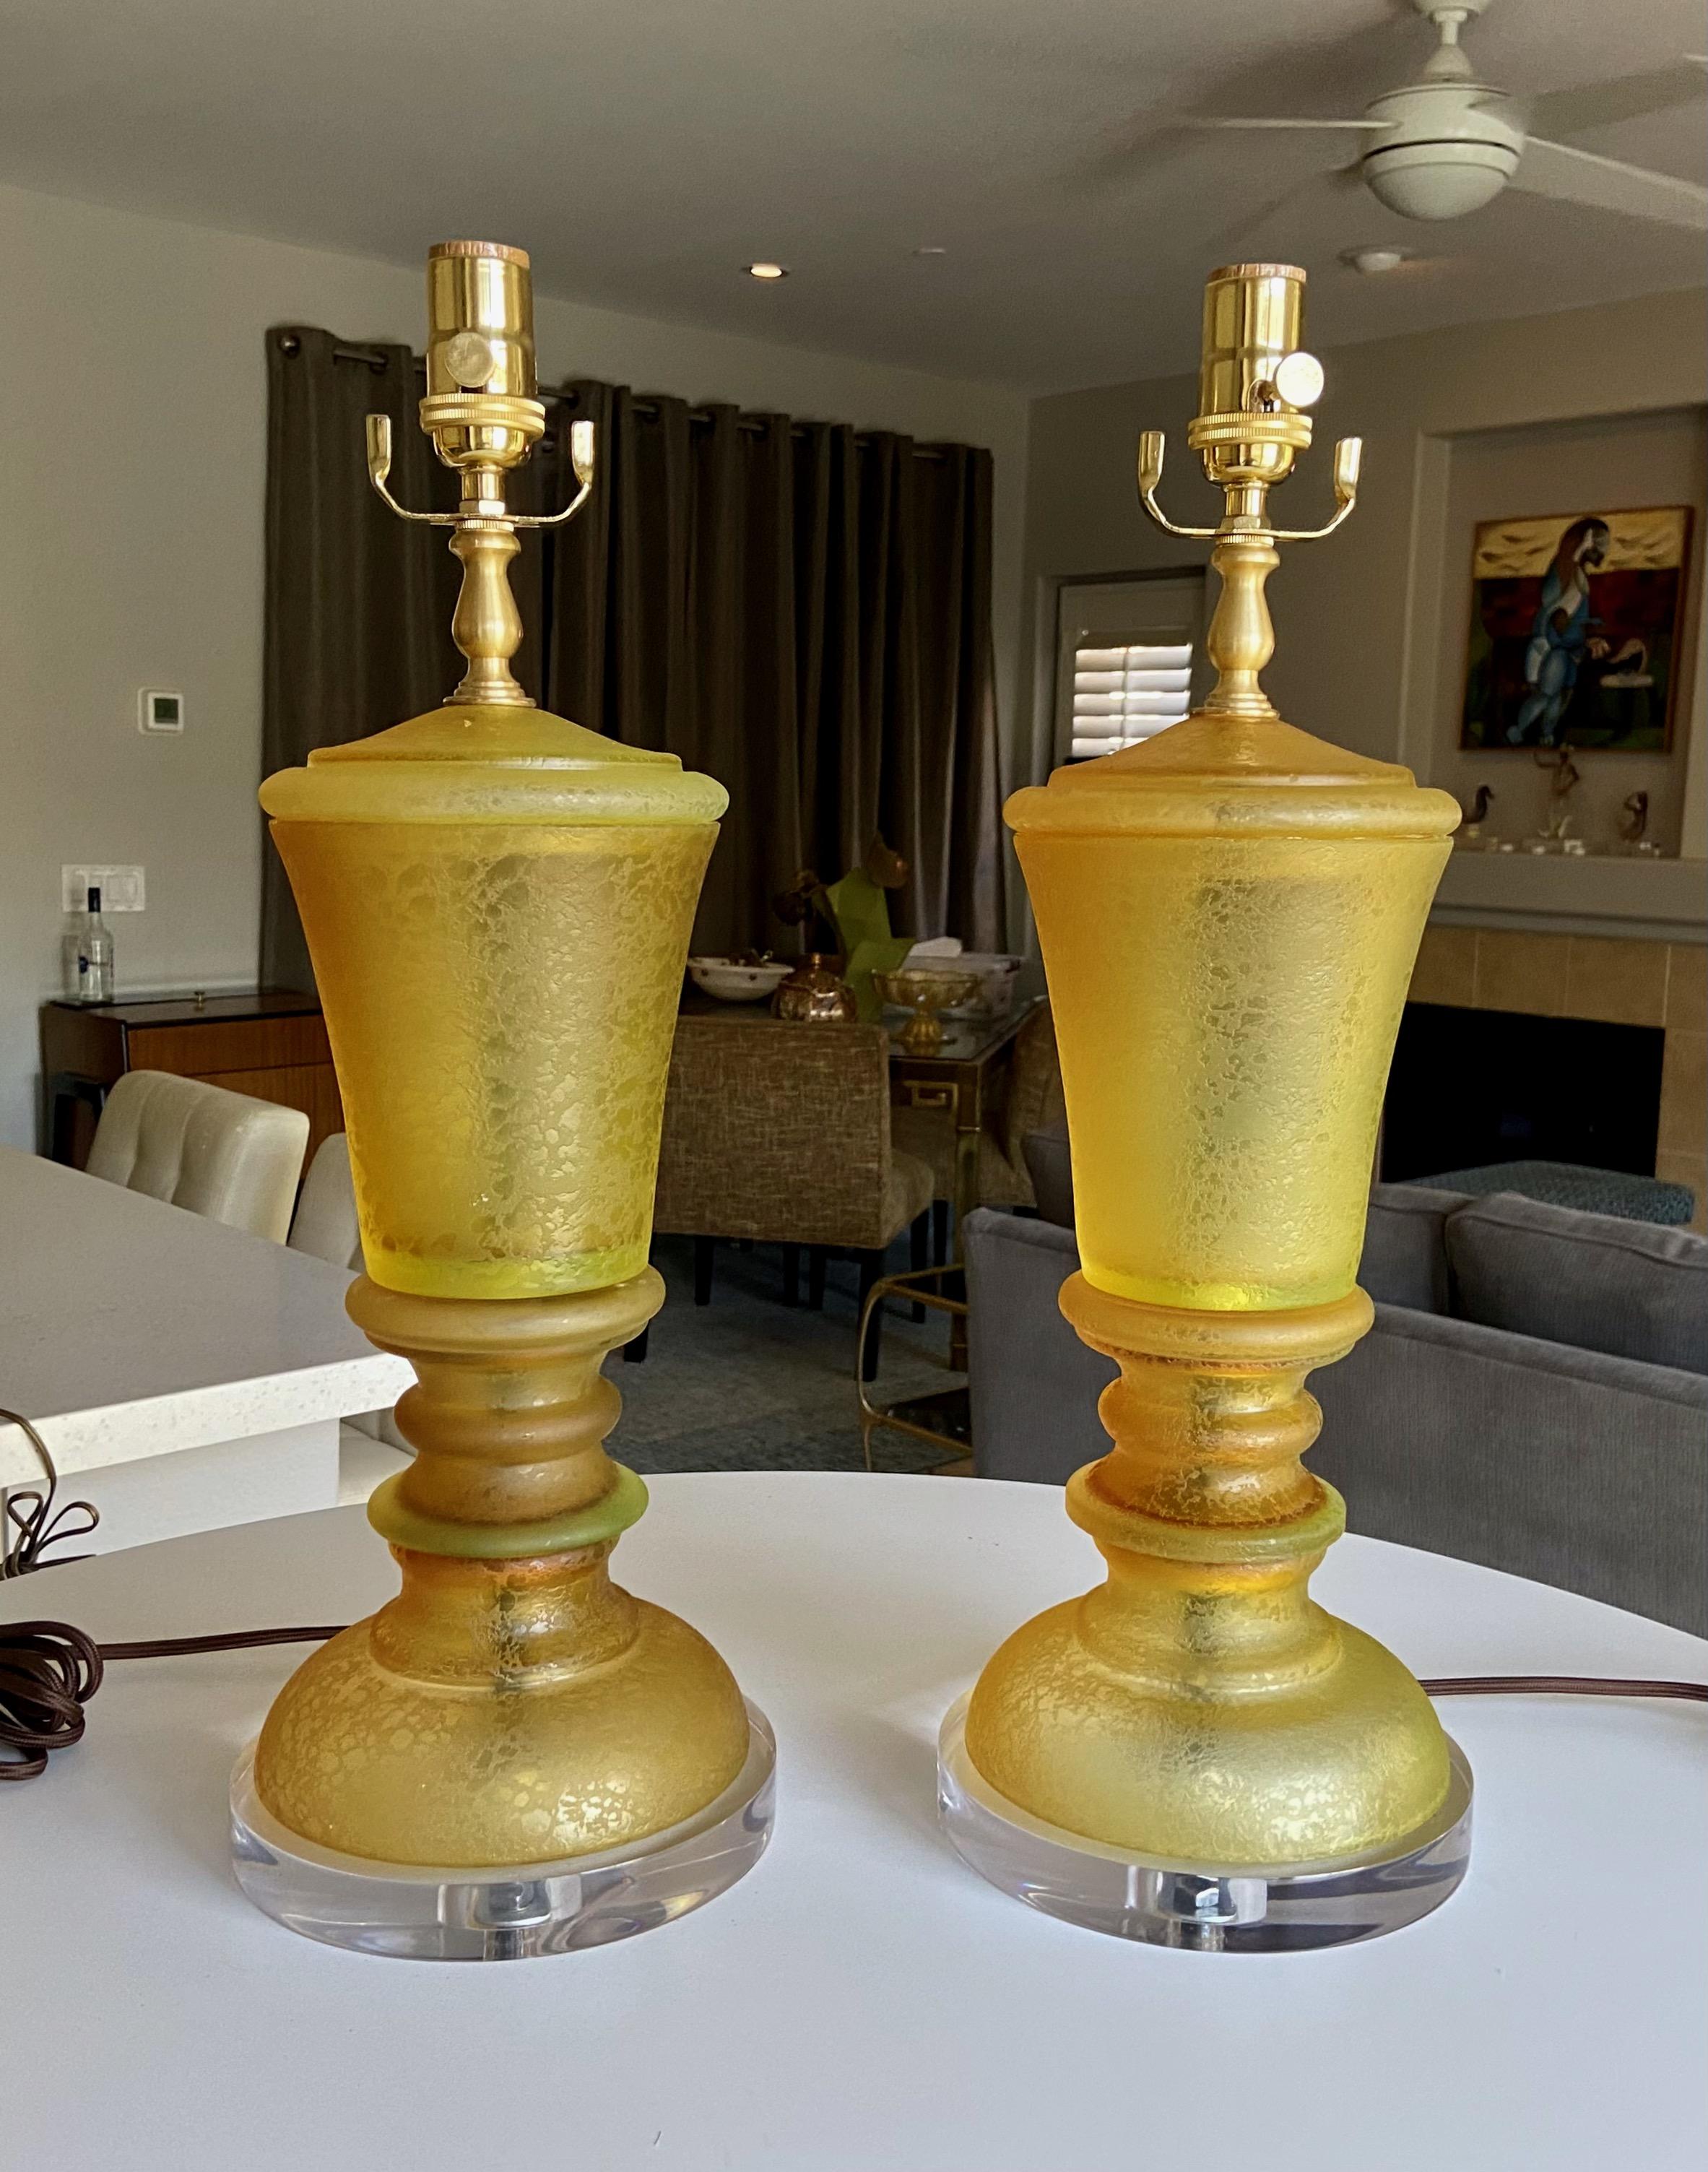 Pair of Seguso handblown Italian Murano glass tables lamps on new acrylic bases. The color is varying shades of amber and yellow and glass is in the Corroso technique. Newly wired for US with new brass fittings, 3-way sockets and rayon covered